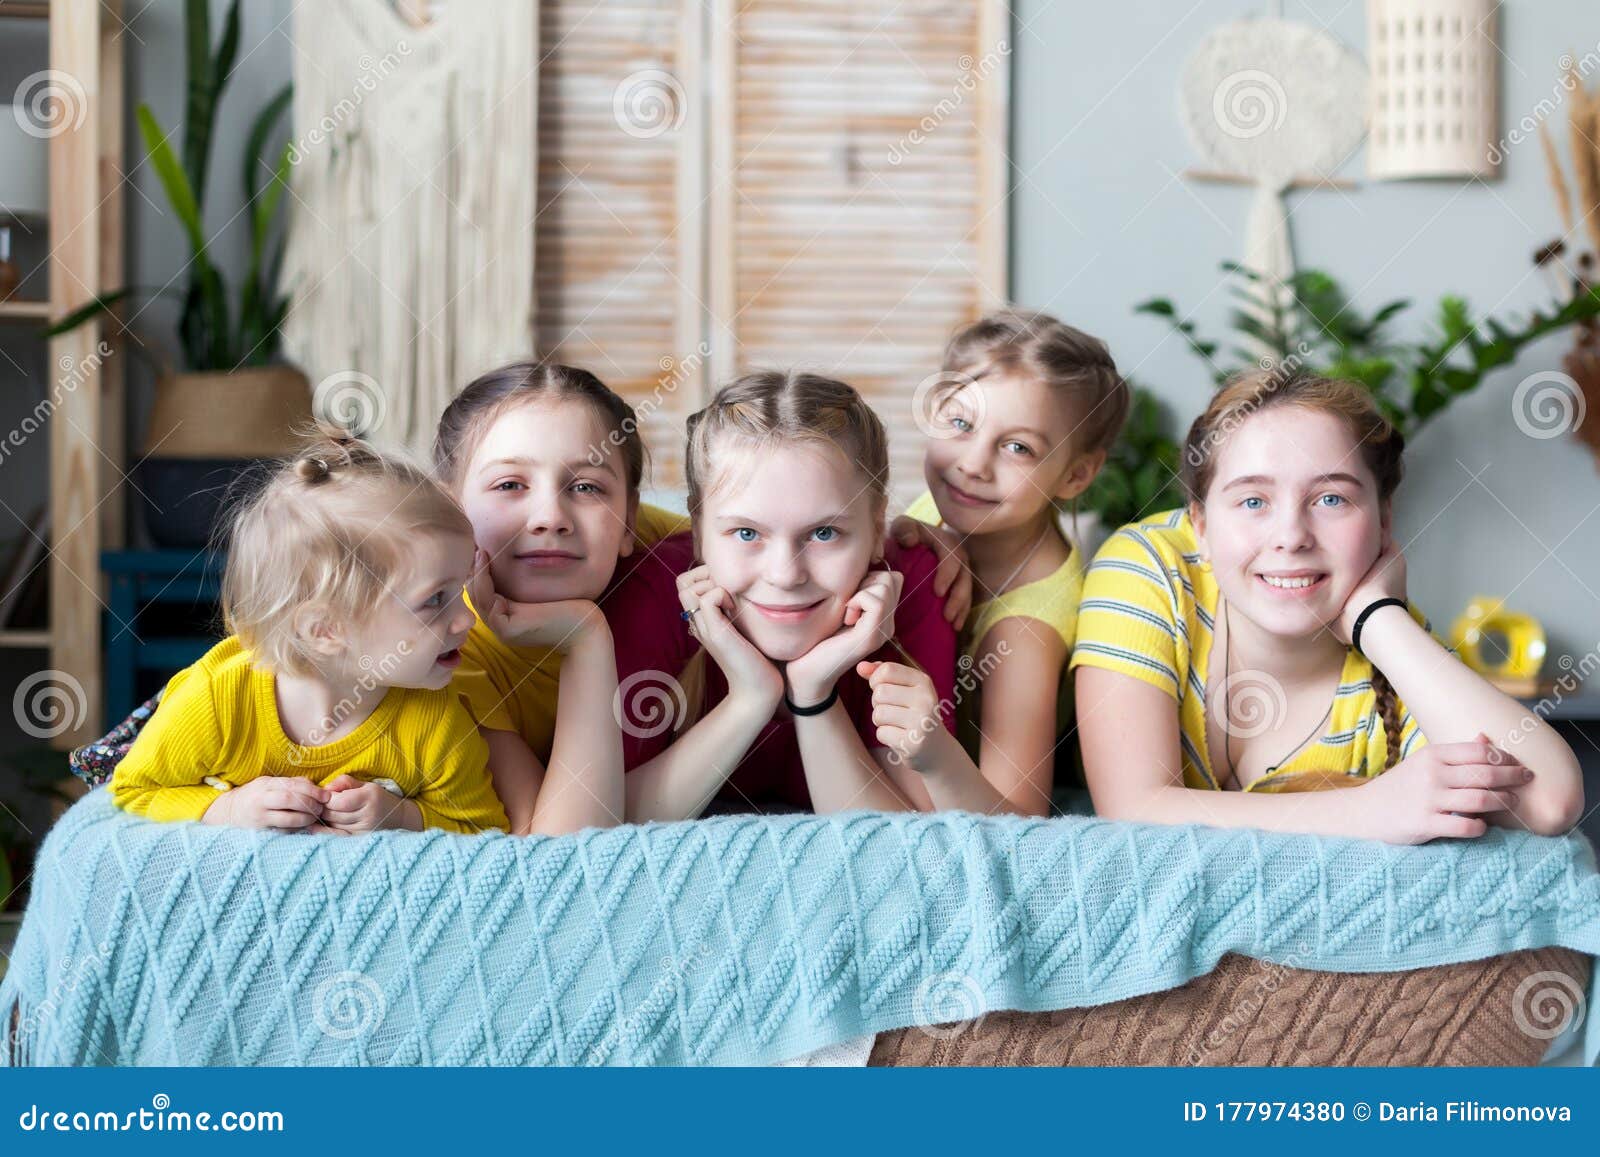 Portrait of Five Sisters on Bed Stock Photo - Image of friendship ...